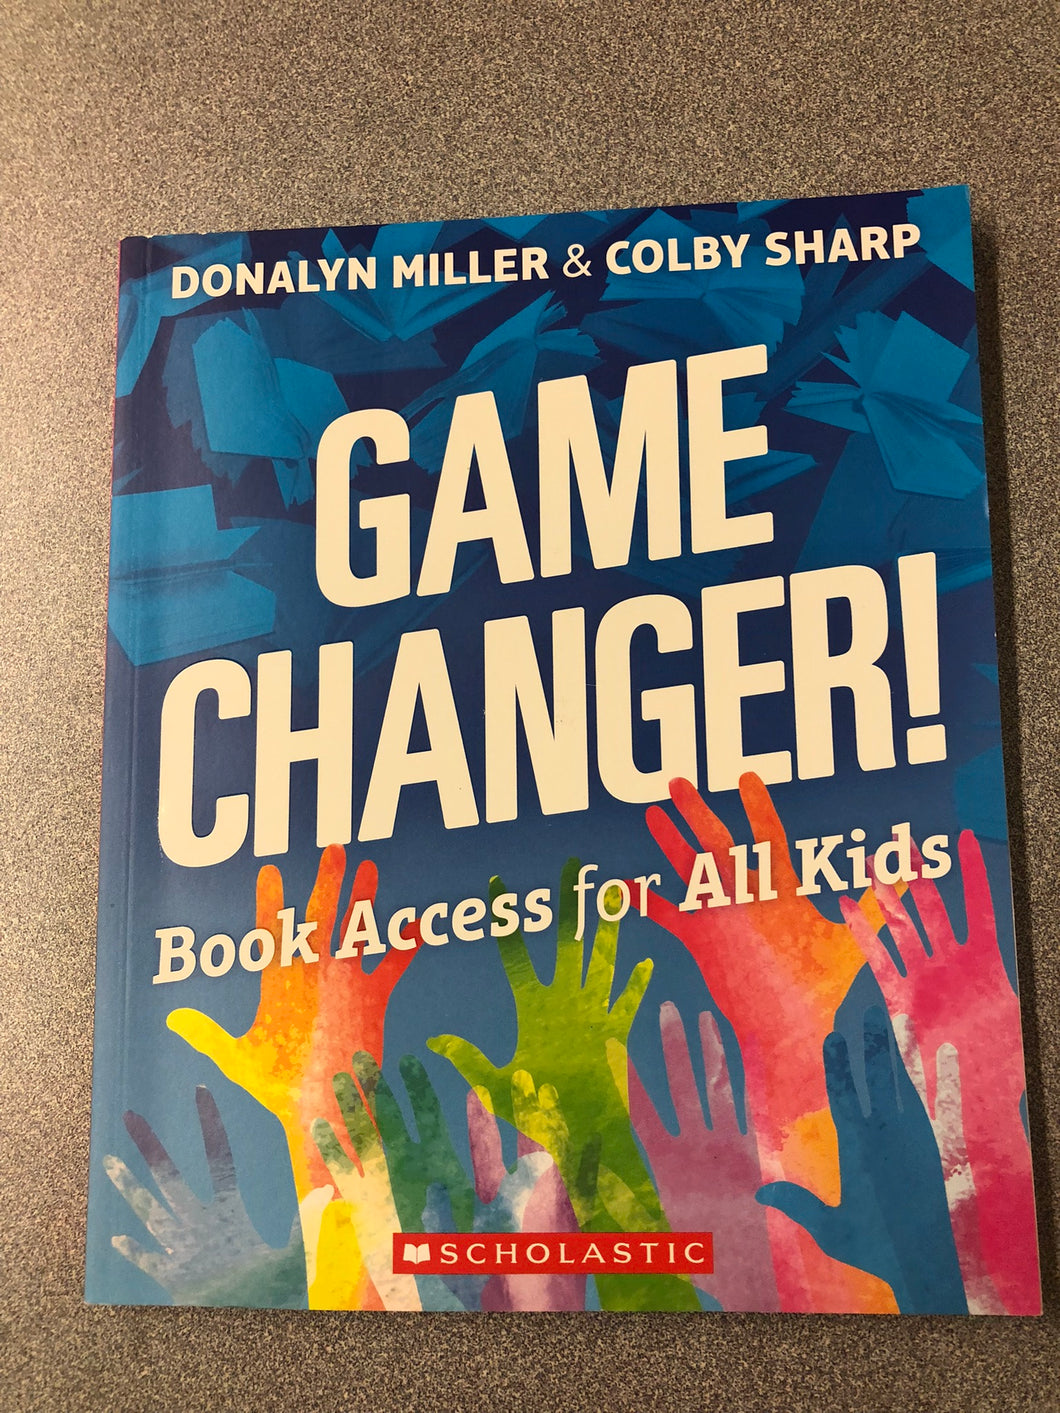 Game Changer!: Book Access for All Kids, Miller Donalyn and Colby Sharp [2018] EM 7/22